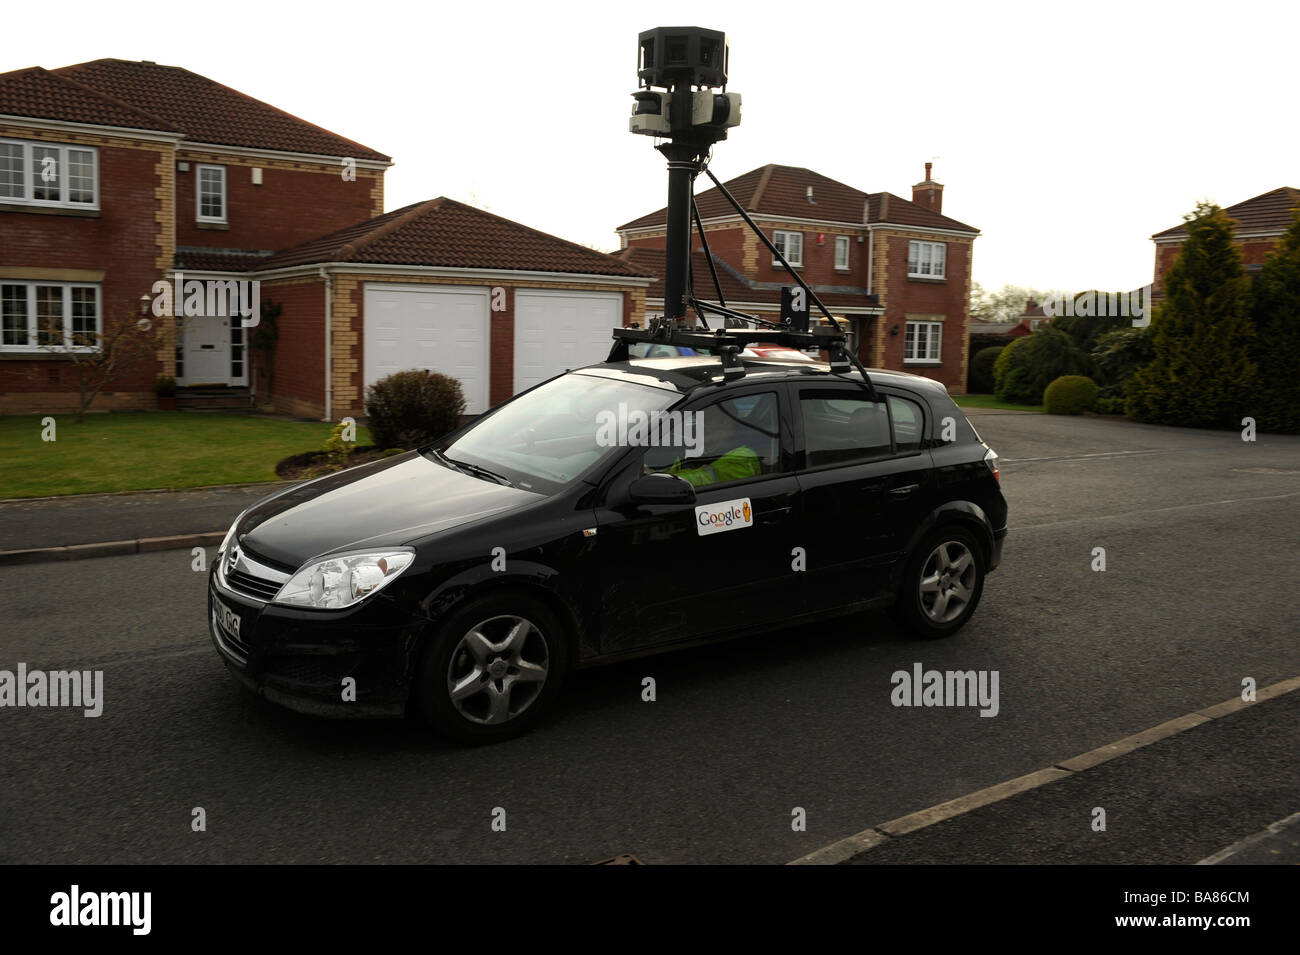 Google streetview car films in a residential street, Stock Photo